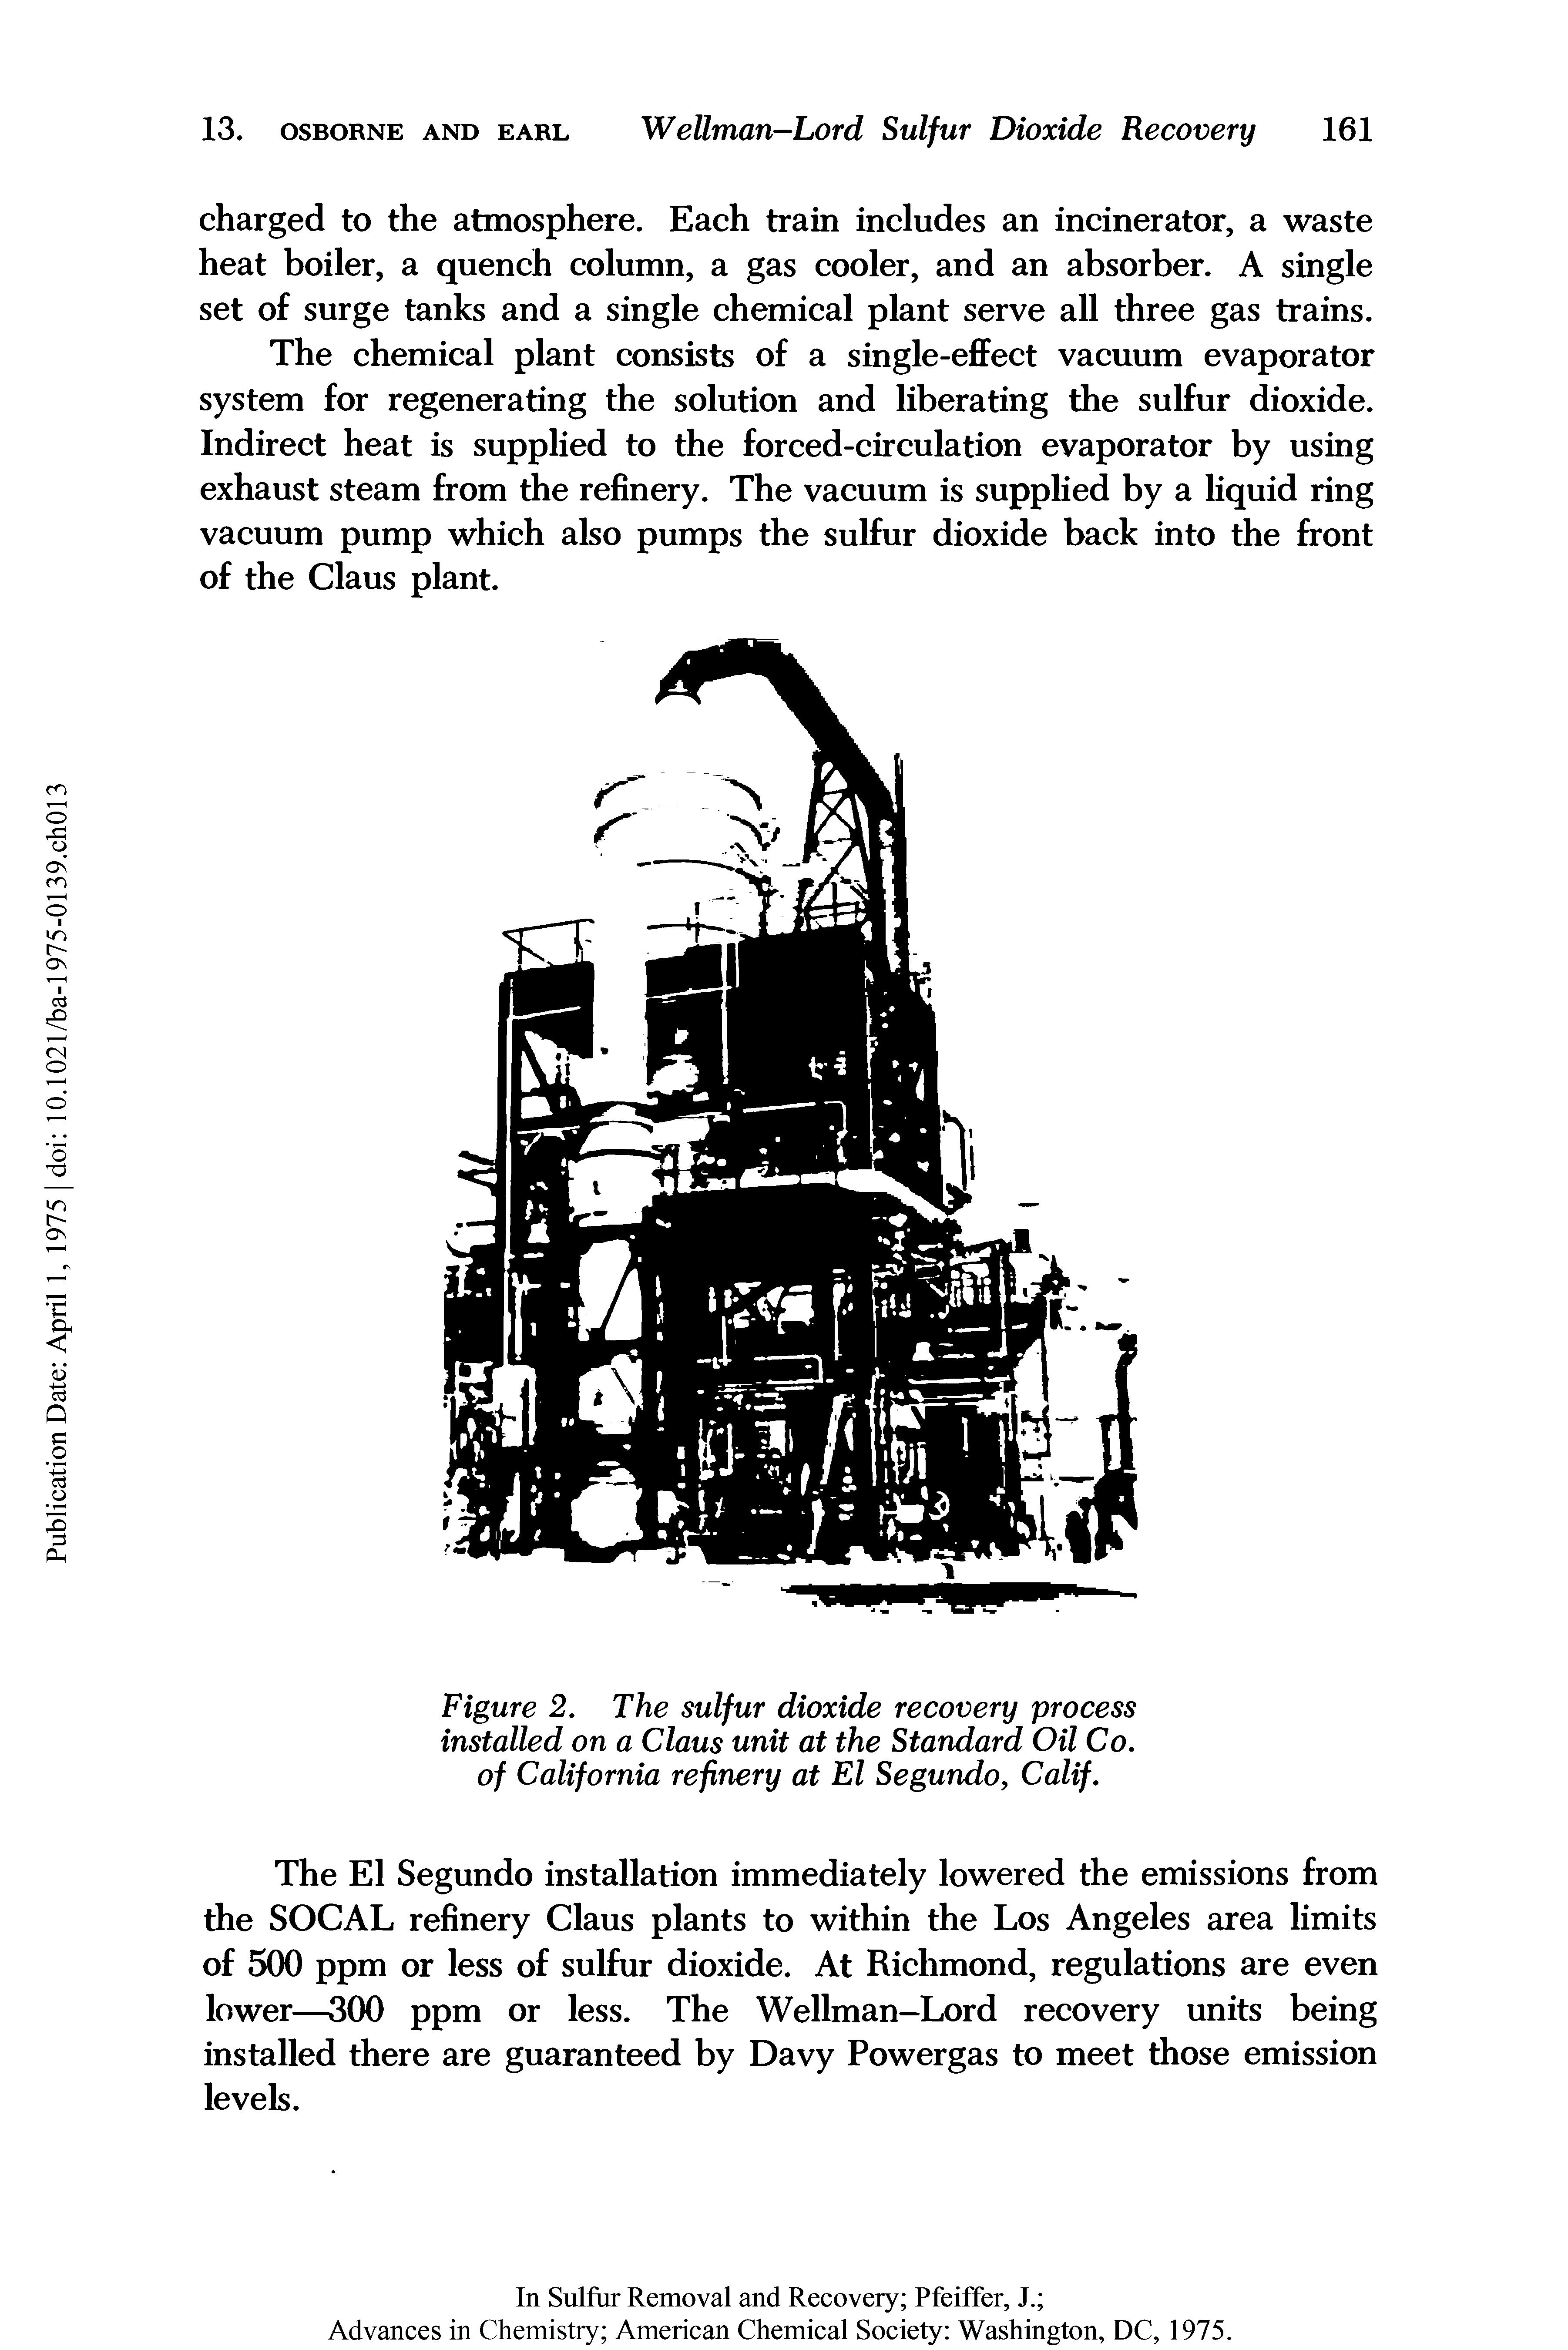 Figure 2. The sulfur dioxide recovery process installed on a Claus unit at the Standard Oil Co. of California refinery at El Segundo, Calif.